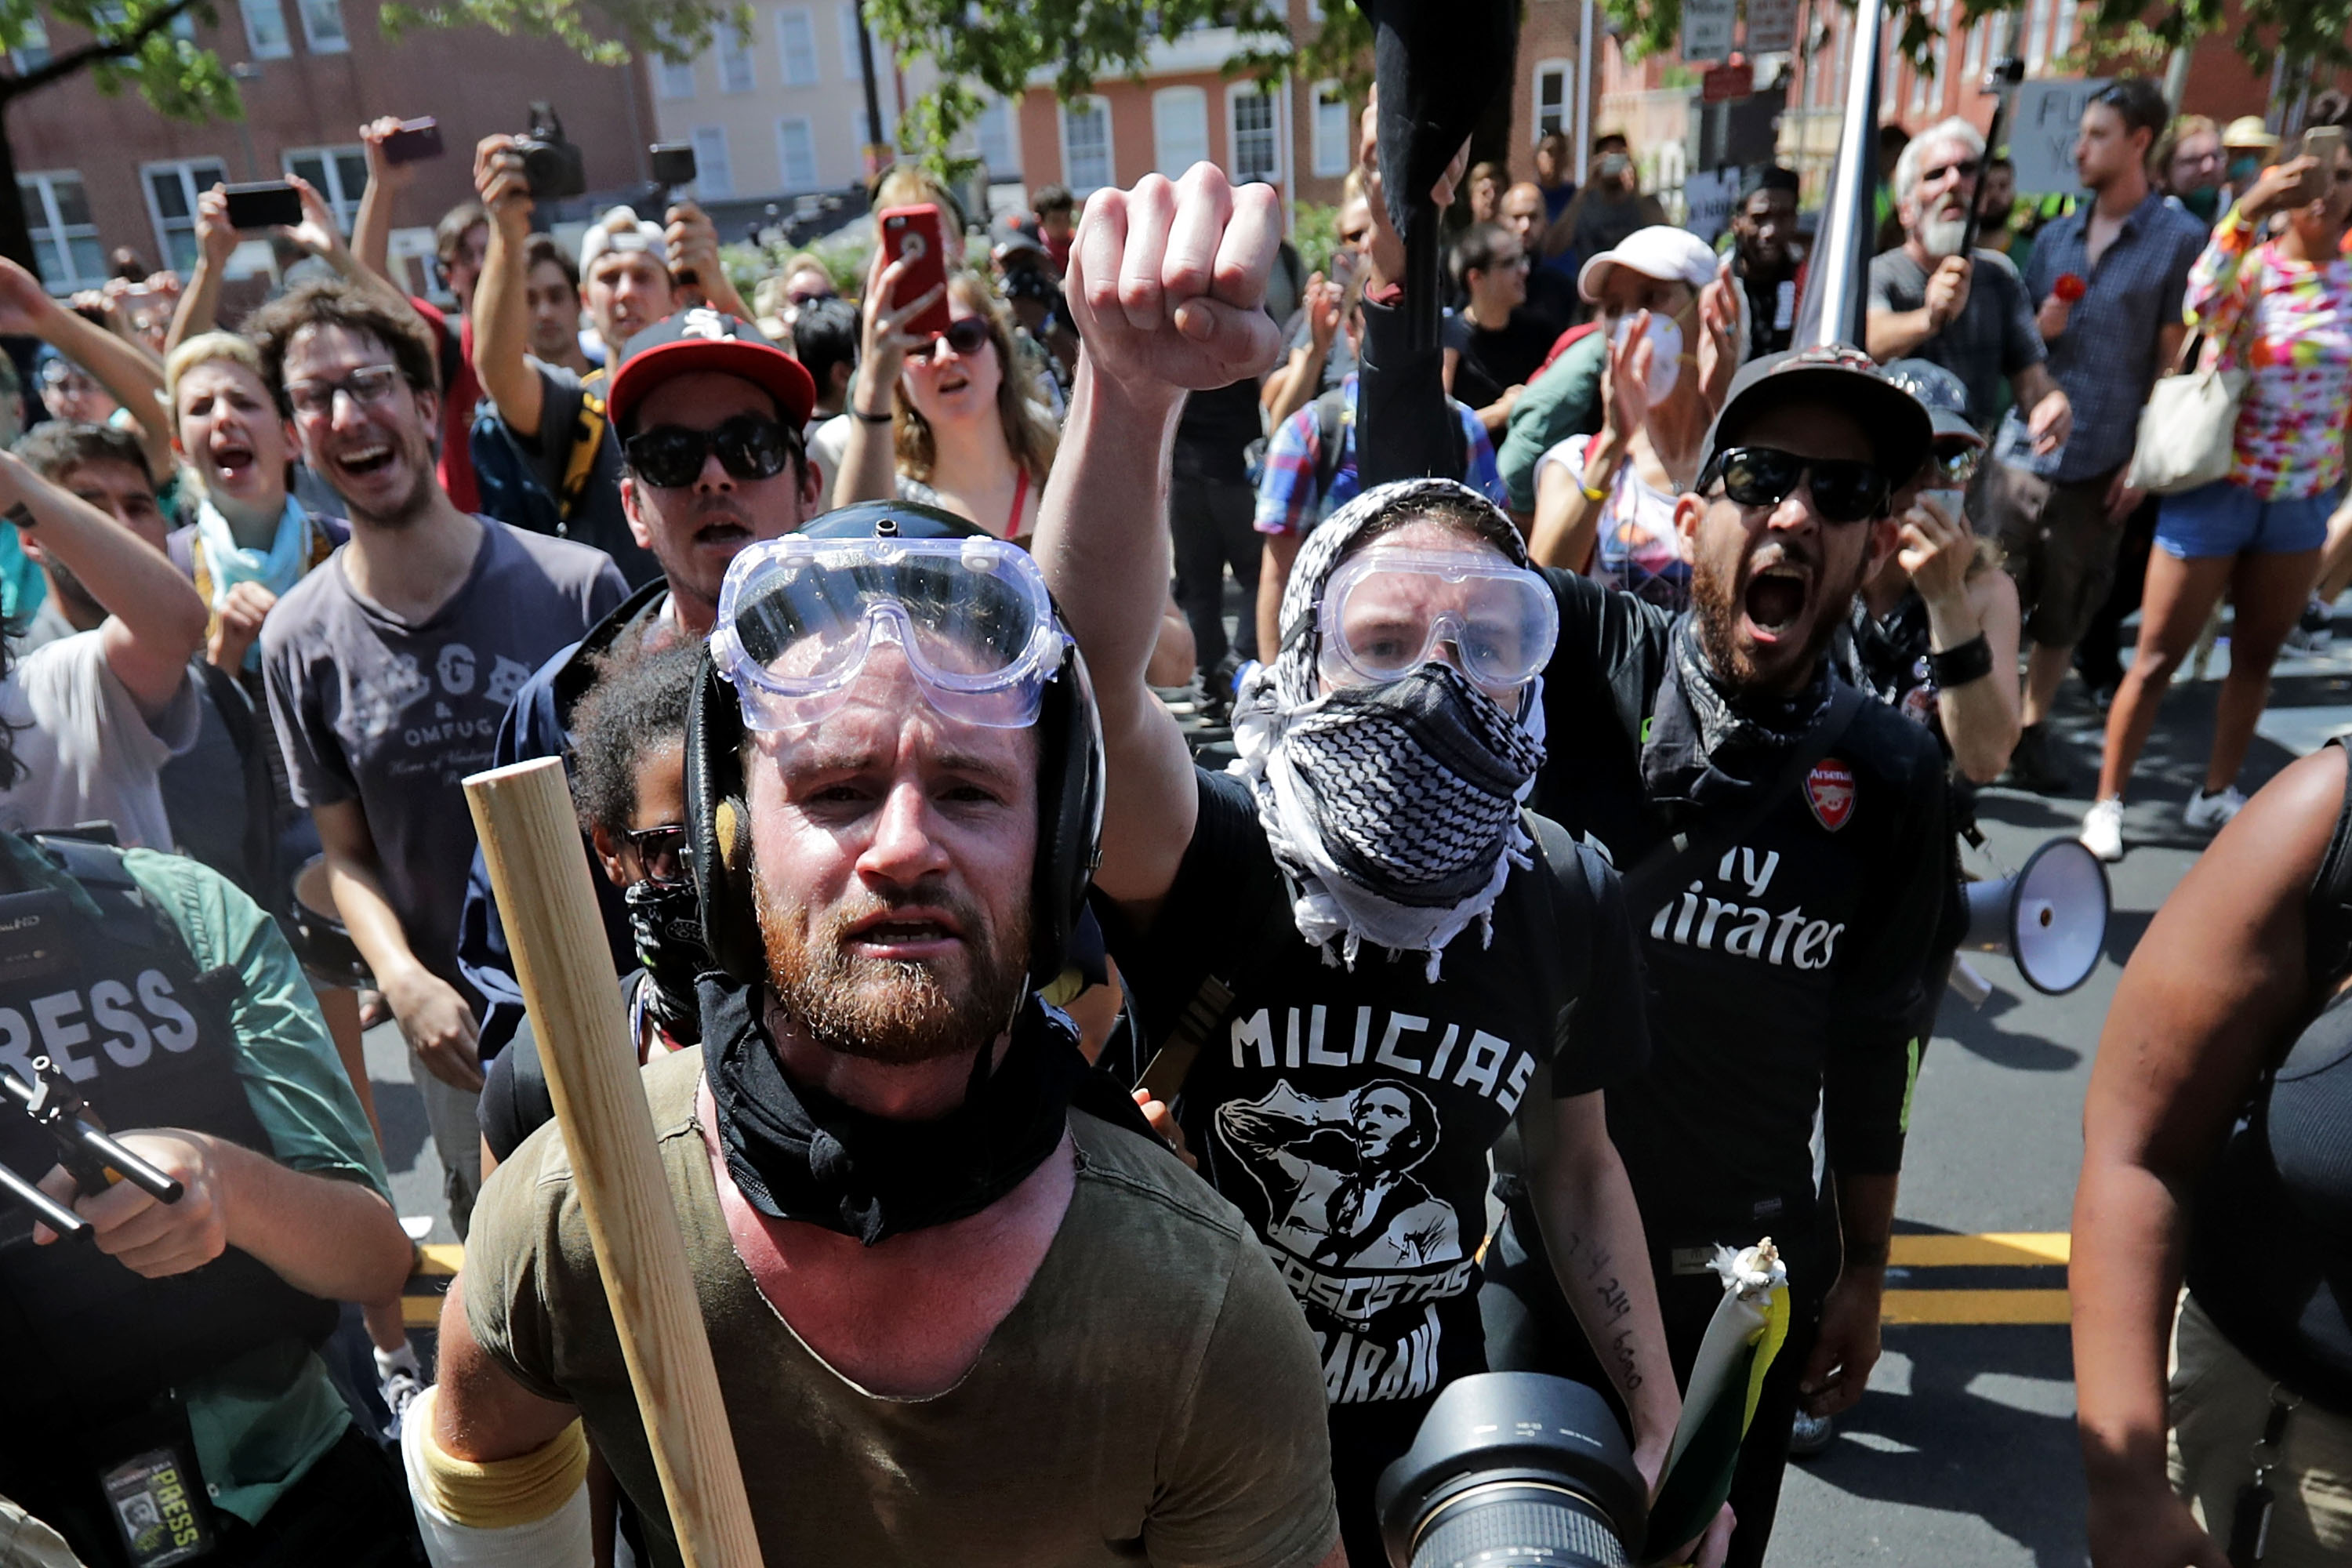 Anti-fascist counter-protesters wait outside Emancipation Park to hurl insluts as white nationalists, neo-Nazis and members of the "alt-right" are forced out after the "Unite the Right" rally was declared an unlawful gathering August 12, 2017 in Charlottesville, Virginia. (Chip Somodevilla—Getty Images)